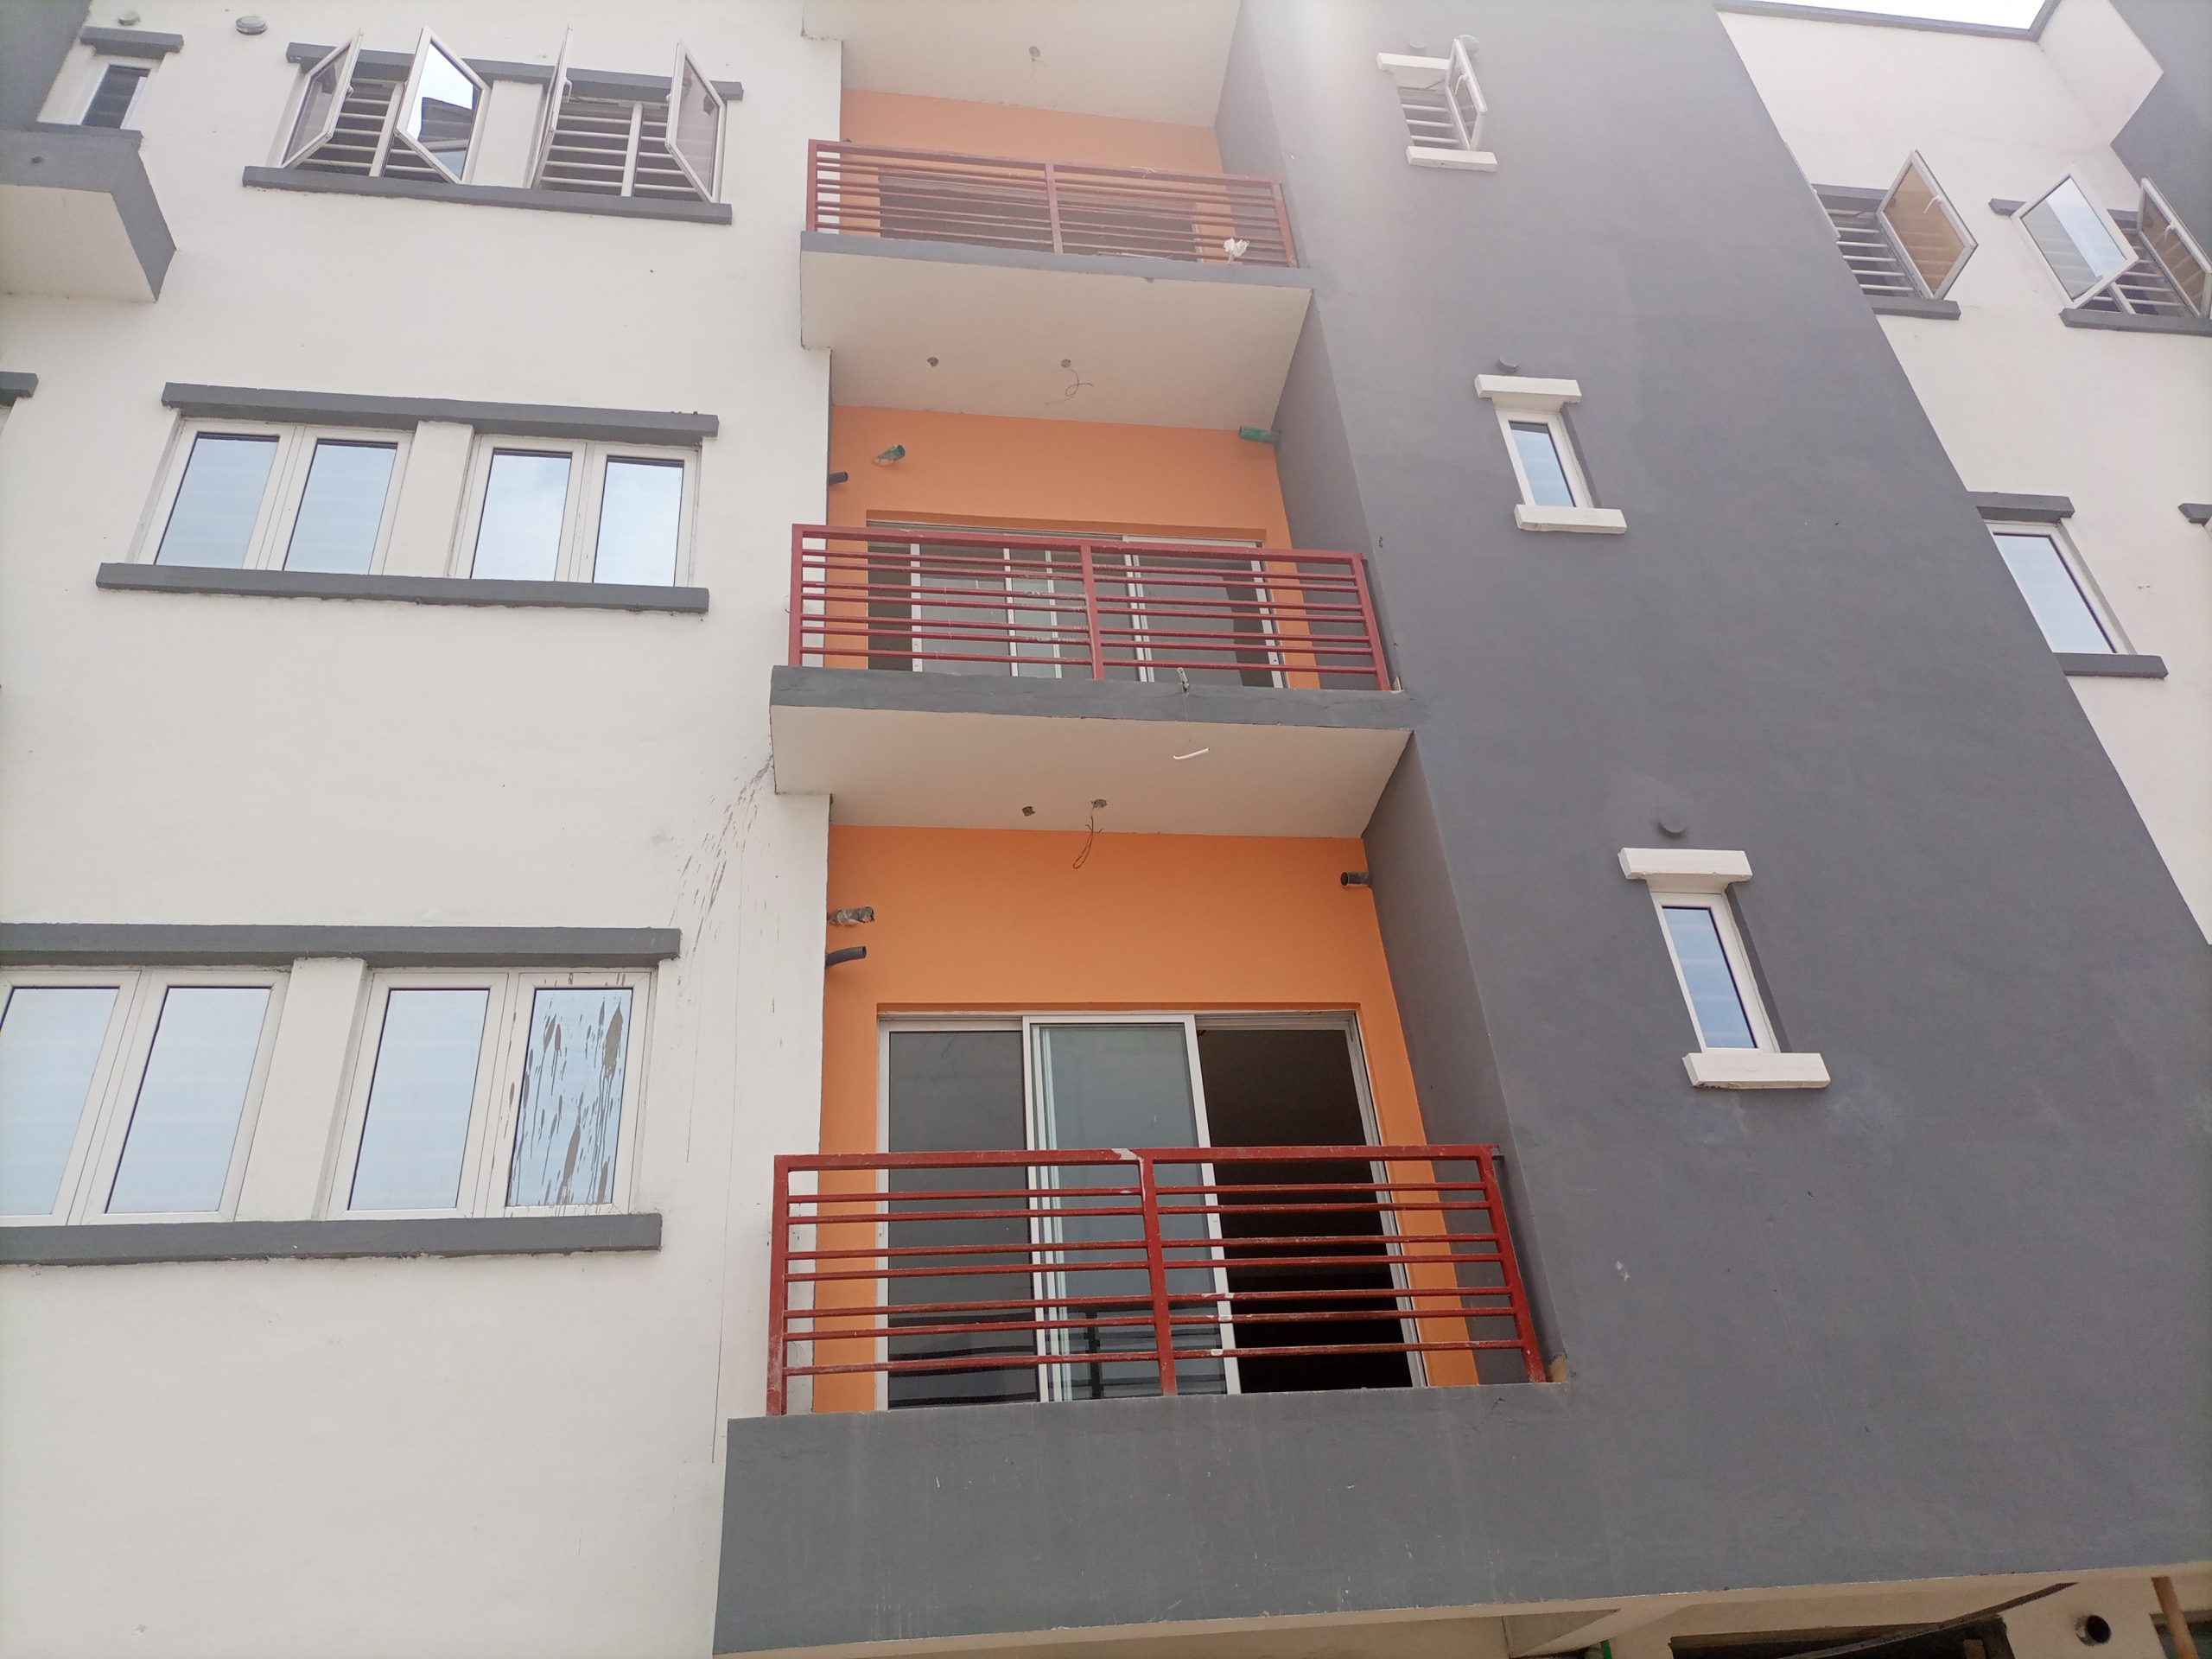 2 & 3 Bedroom Apartment for sale in Abijo, 12 months installment payment with no interest